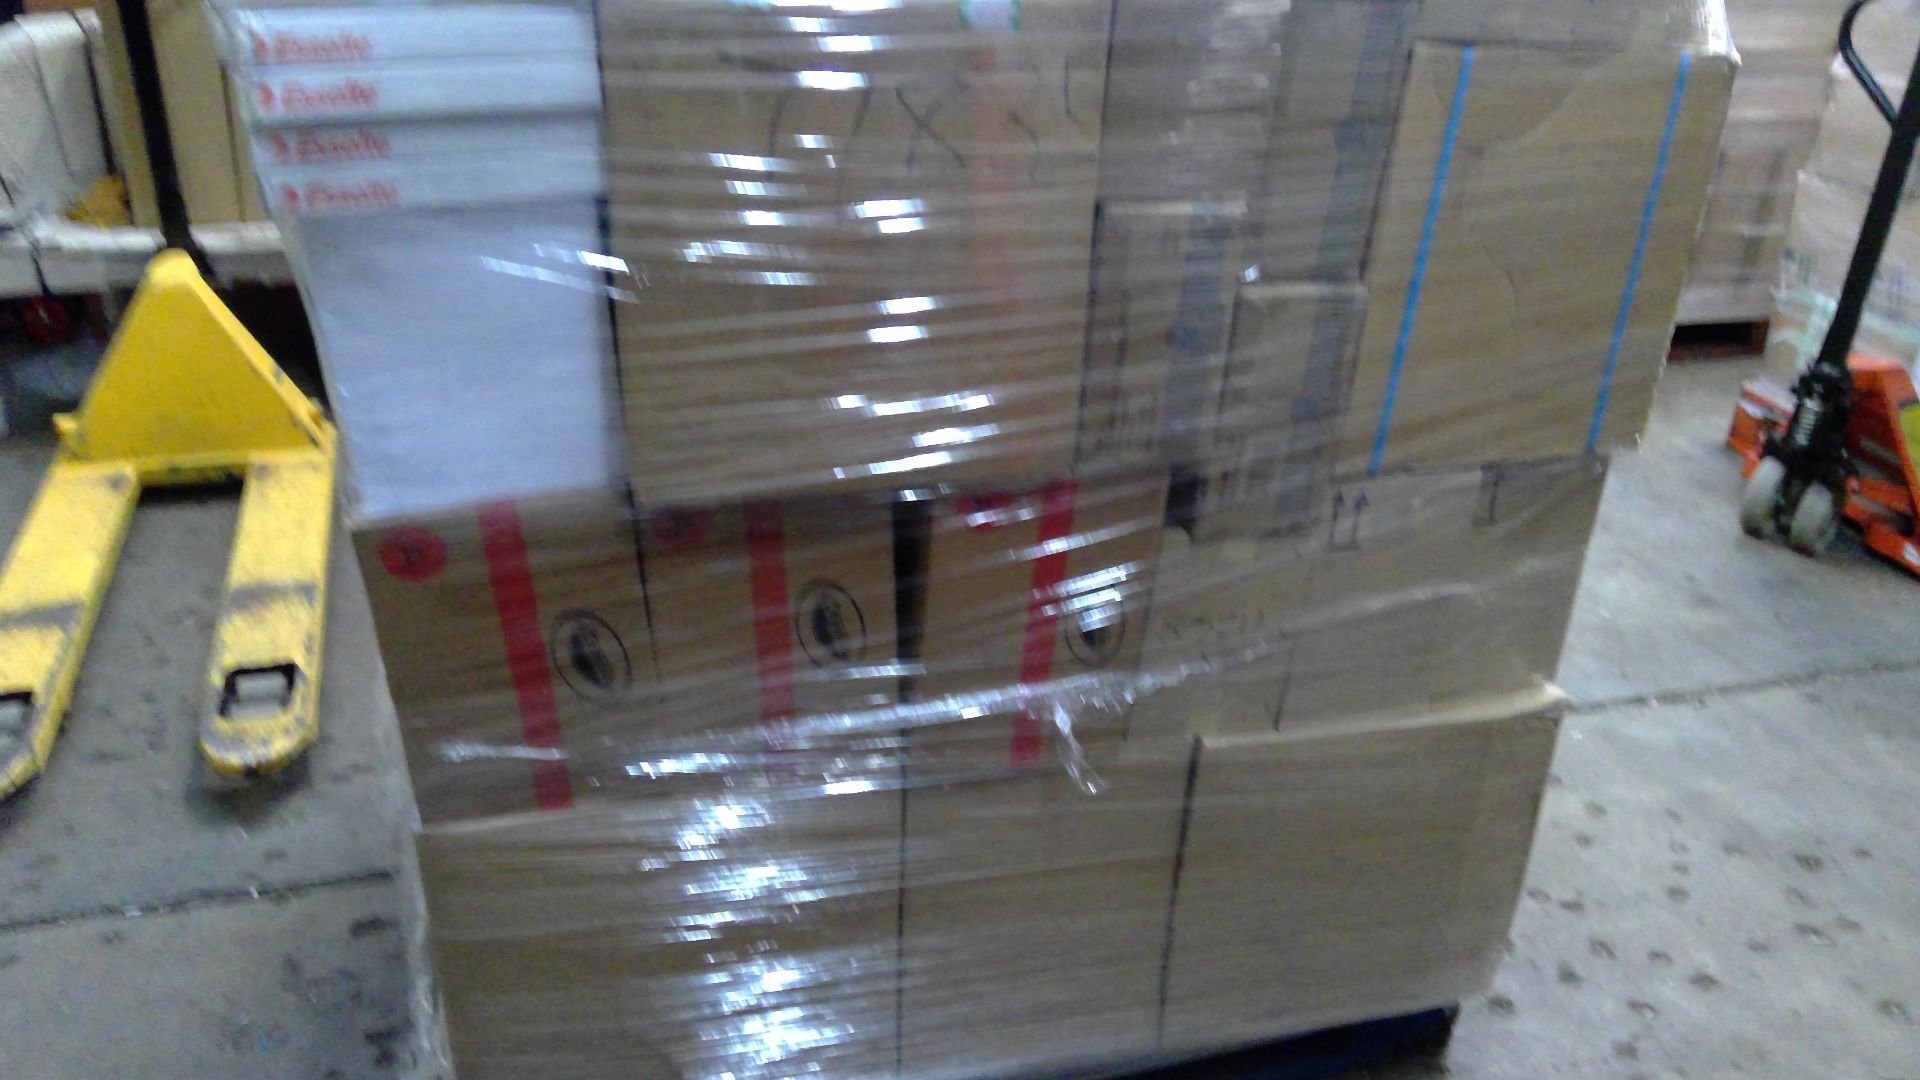 V Grade U Pallet Of Stationery Including Folders-Rubber Bands-Box Files-Leverarch Files-Exercise - Image 8 of 9